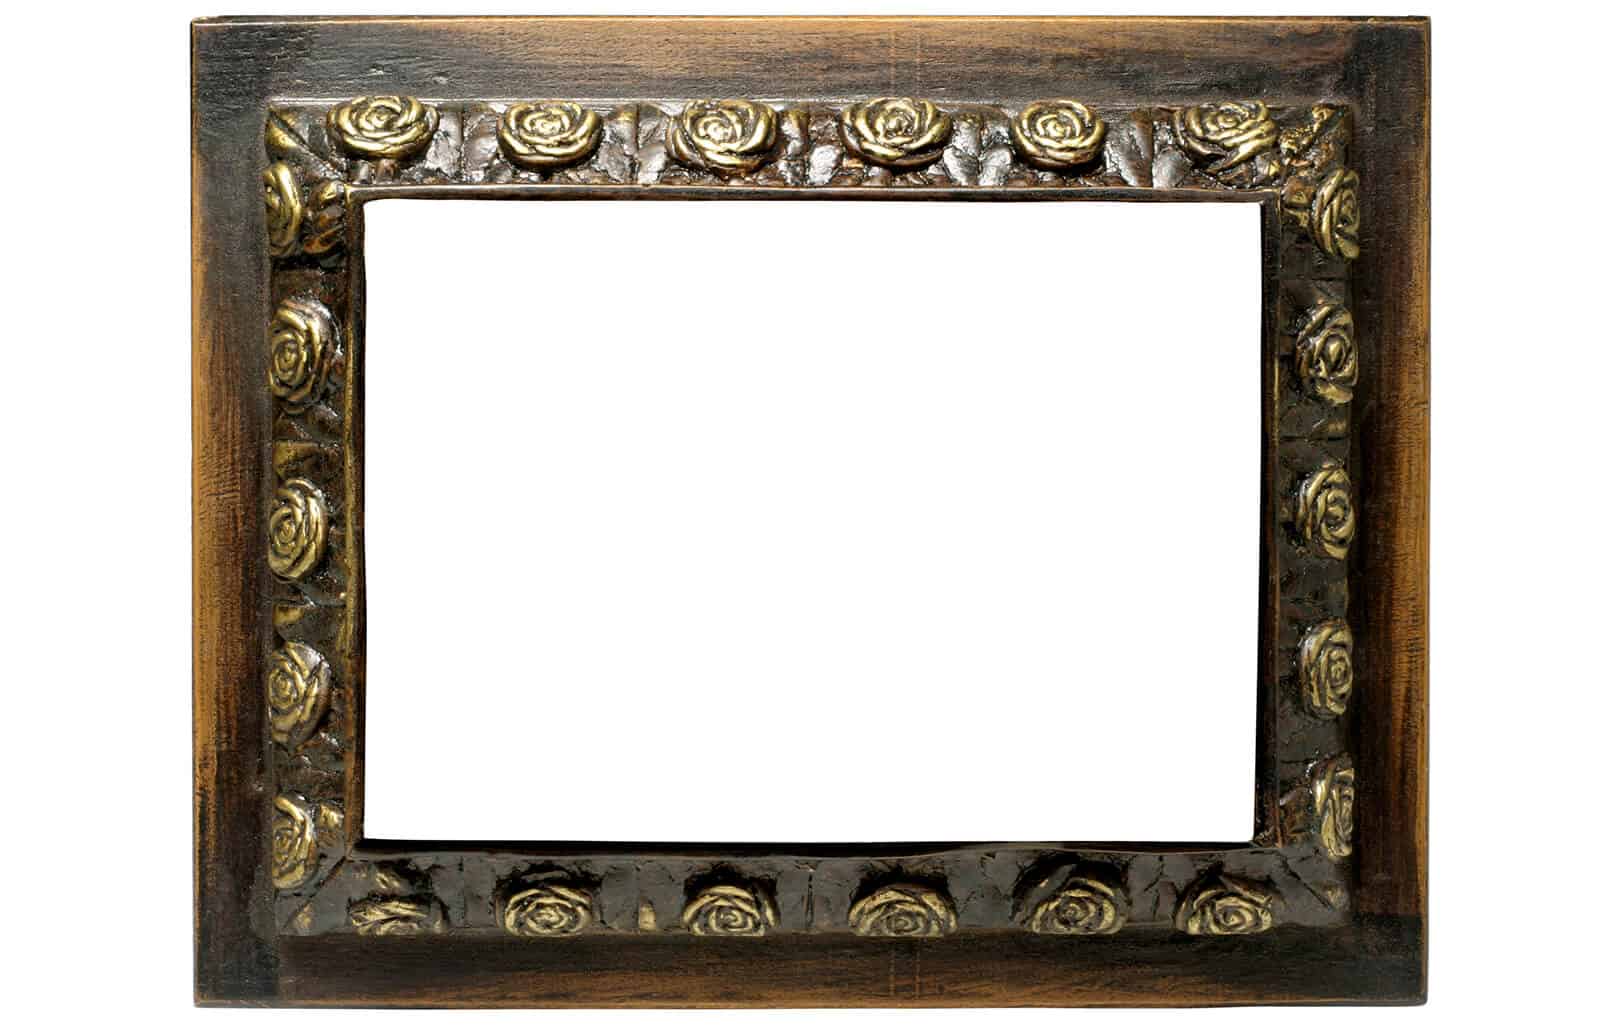 Arts and crafts frame